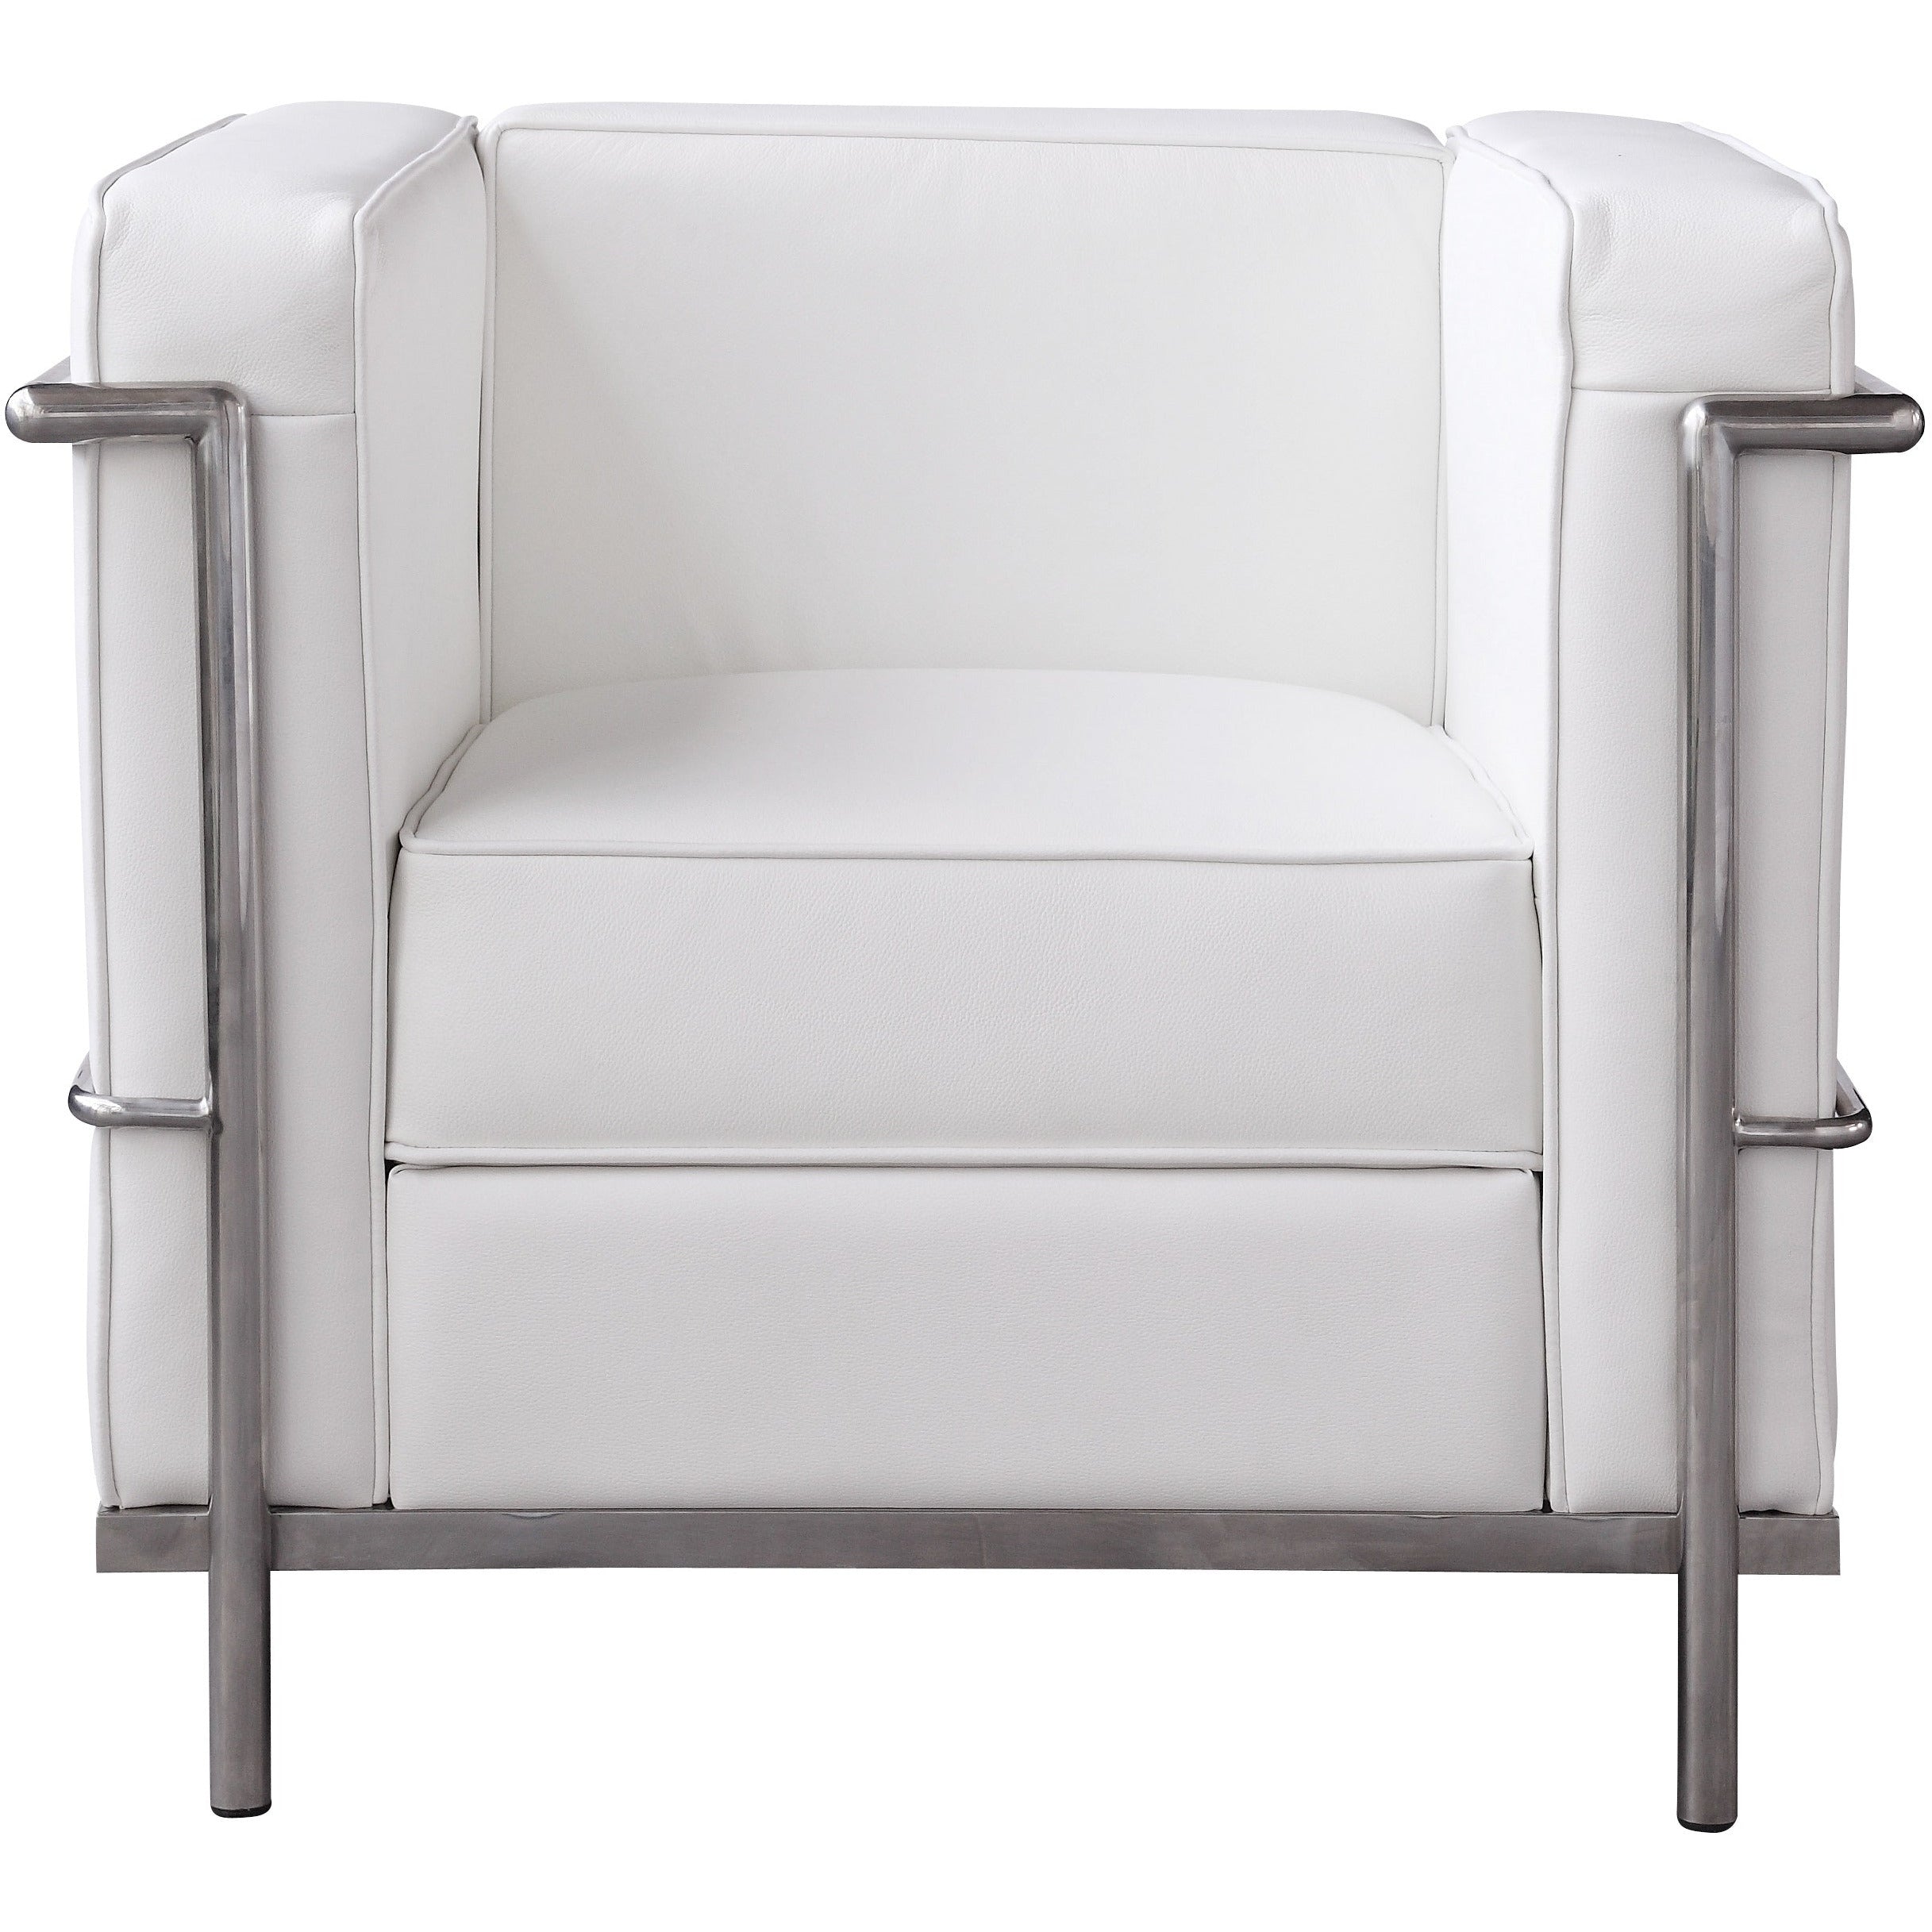 J&M Furniture Cour Italian Leather Chair - White